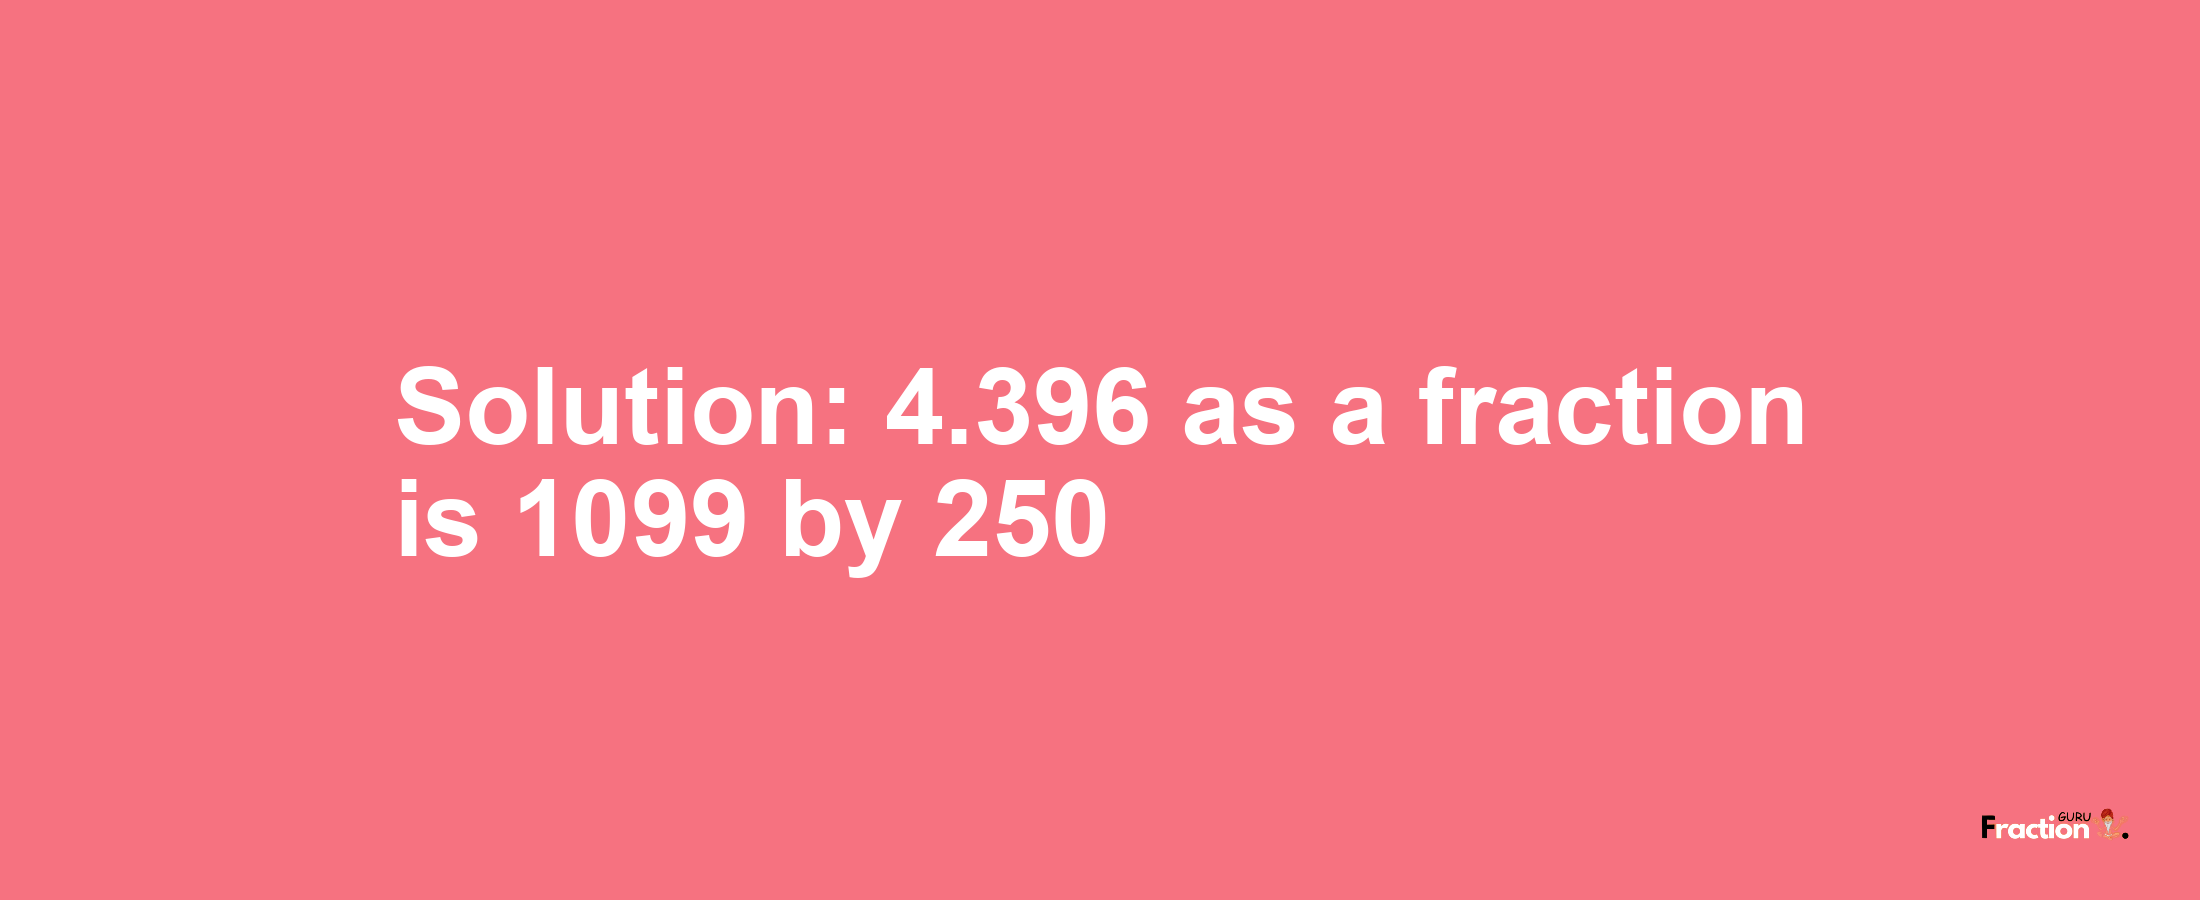 Solution:4.396 as a fraction is 1099/250